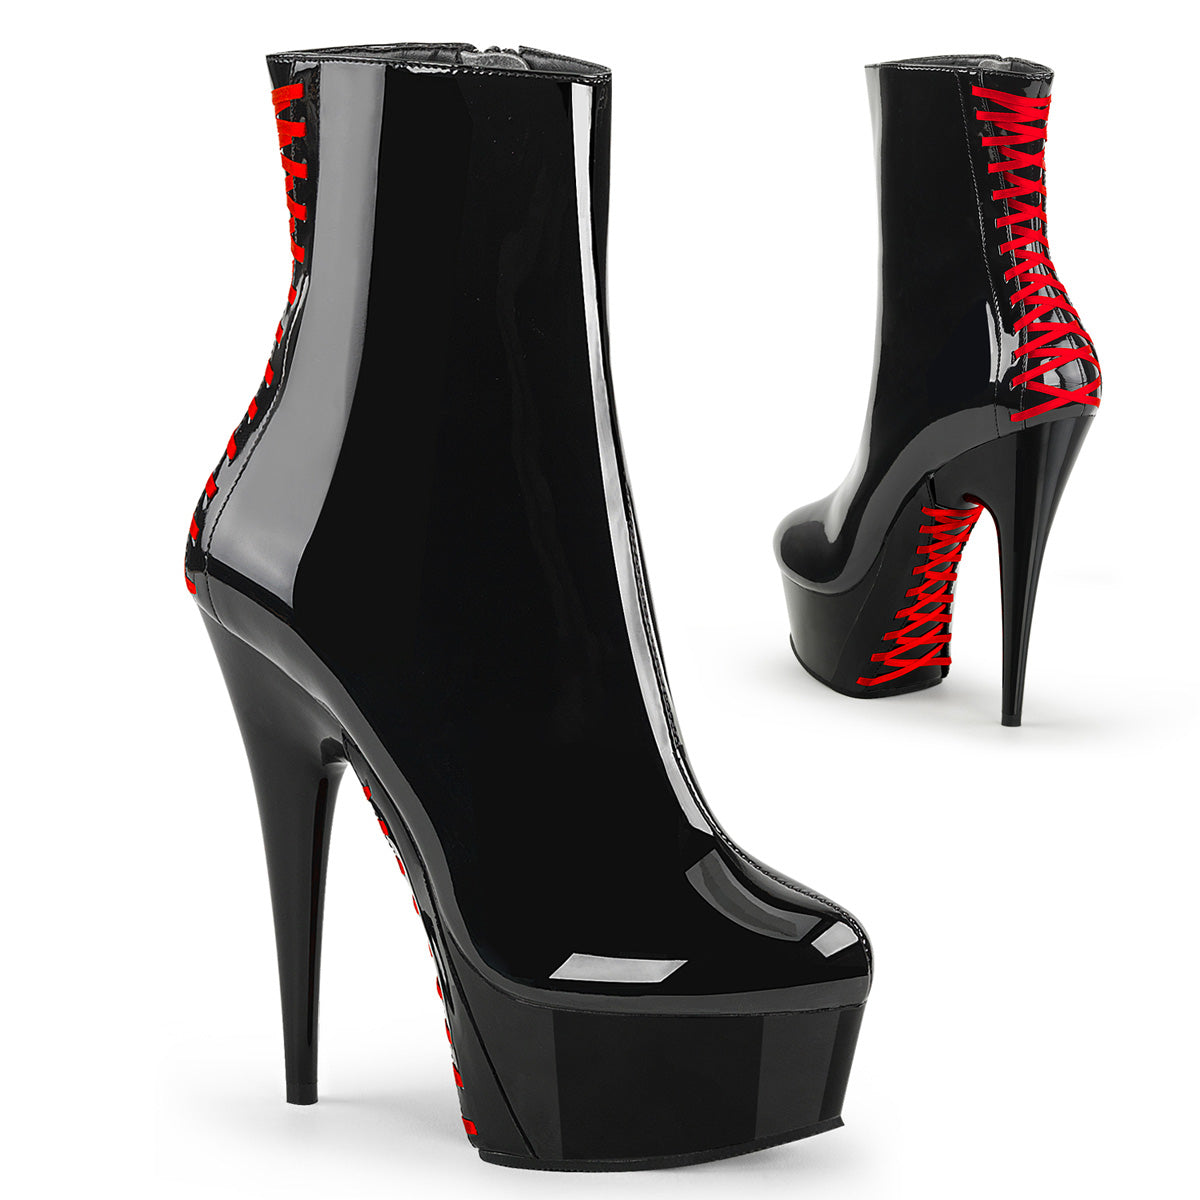 DELIGHT-1010 6" Heel Black and Red Corset Back Ankle Boots